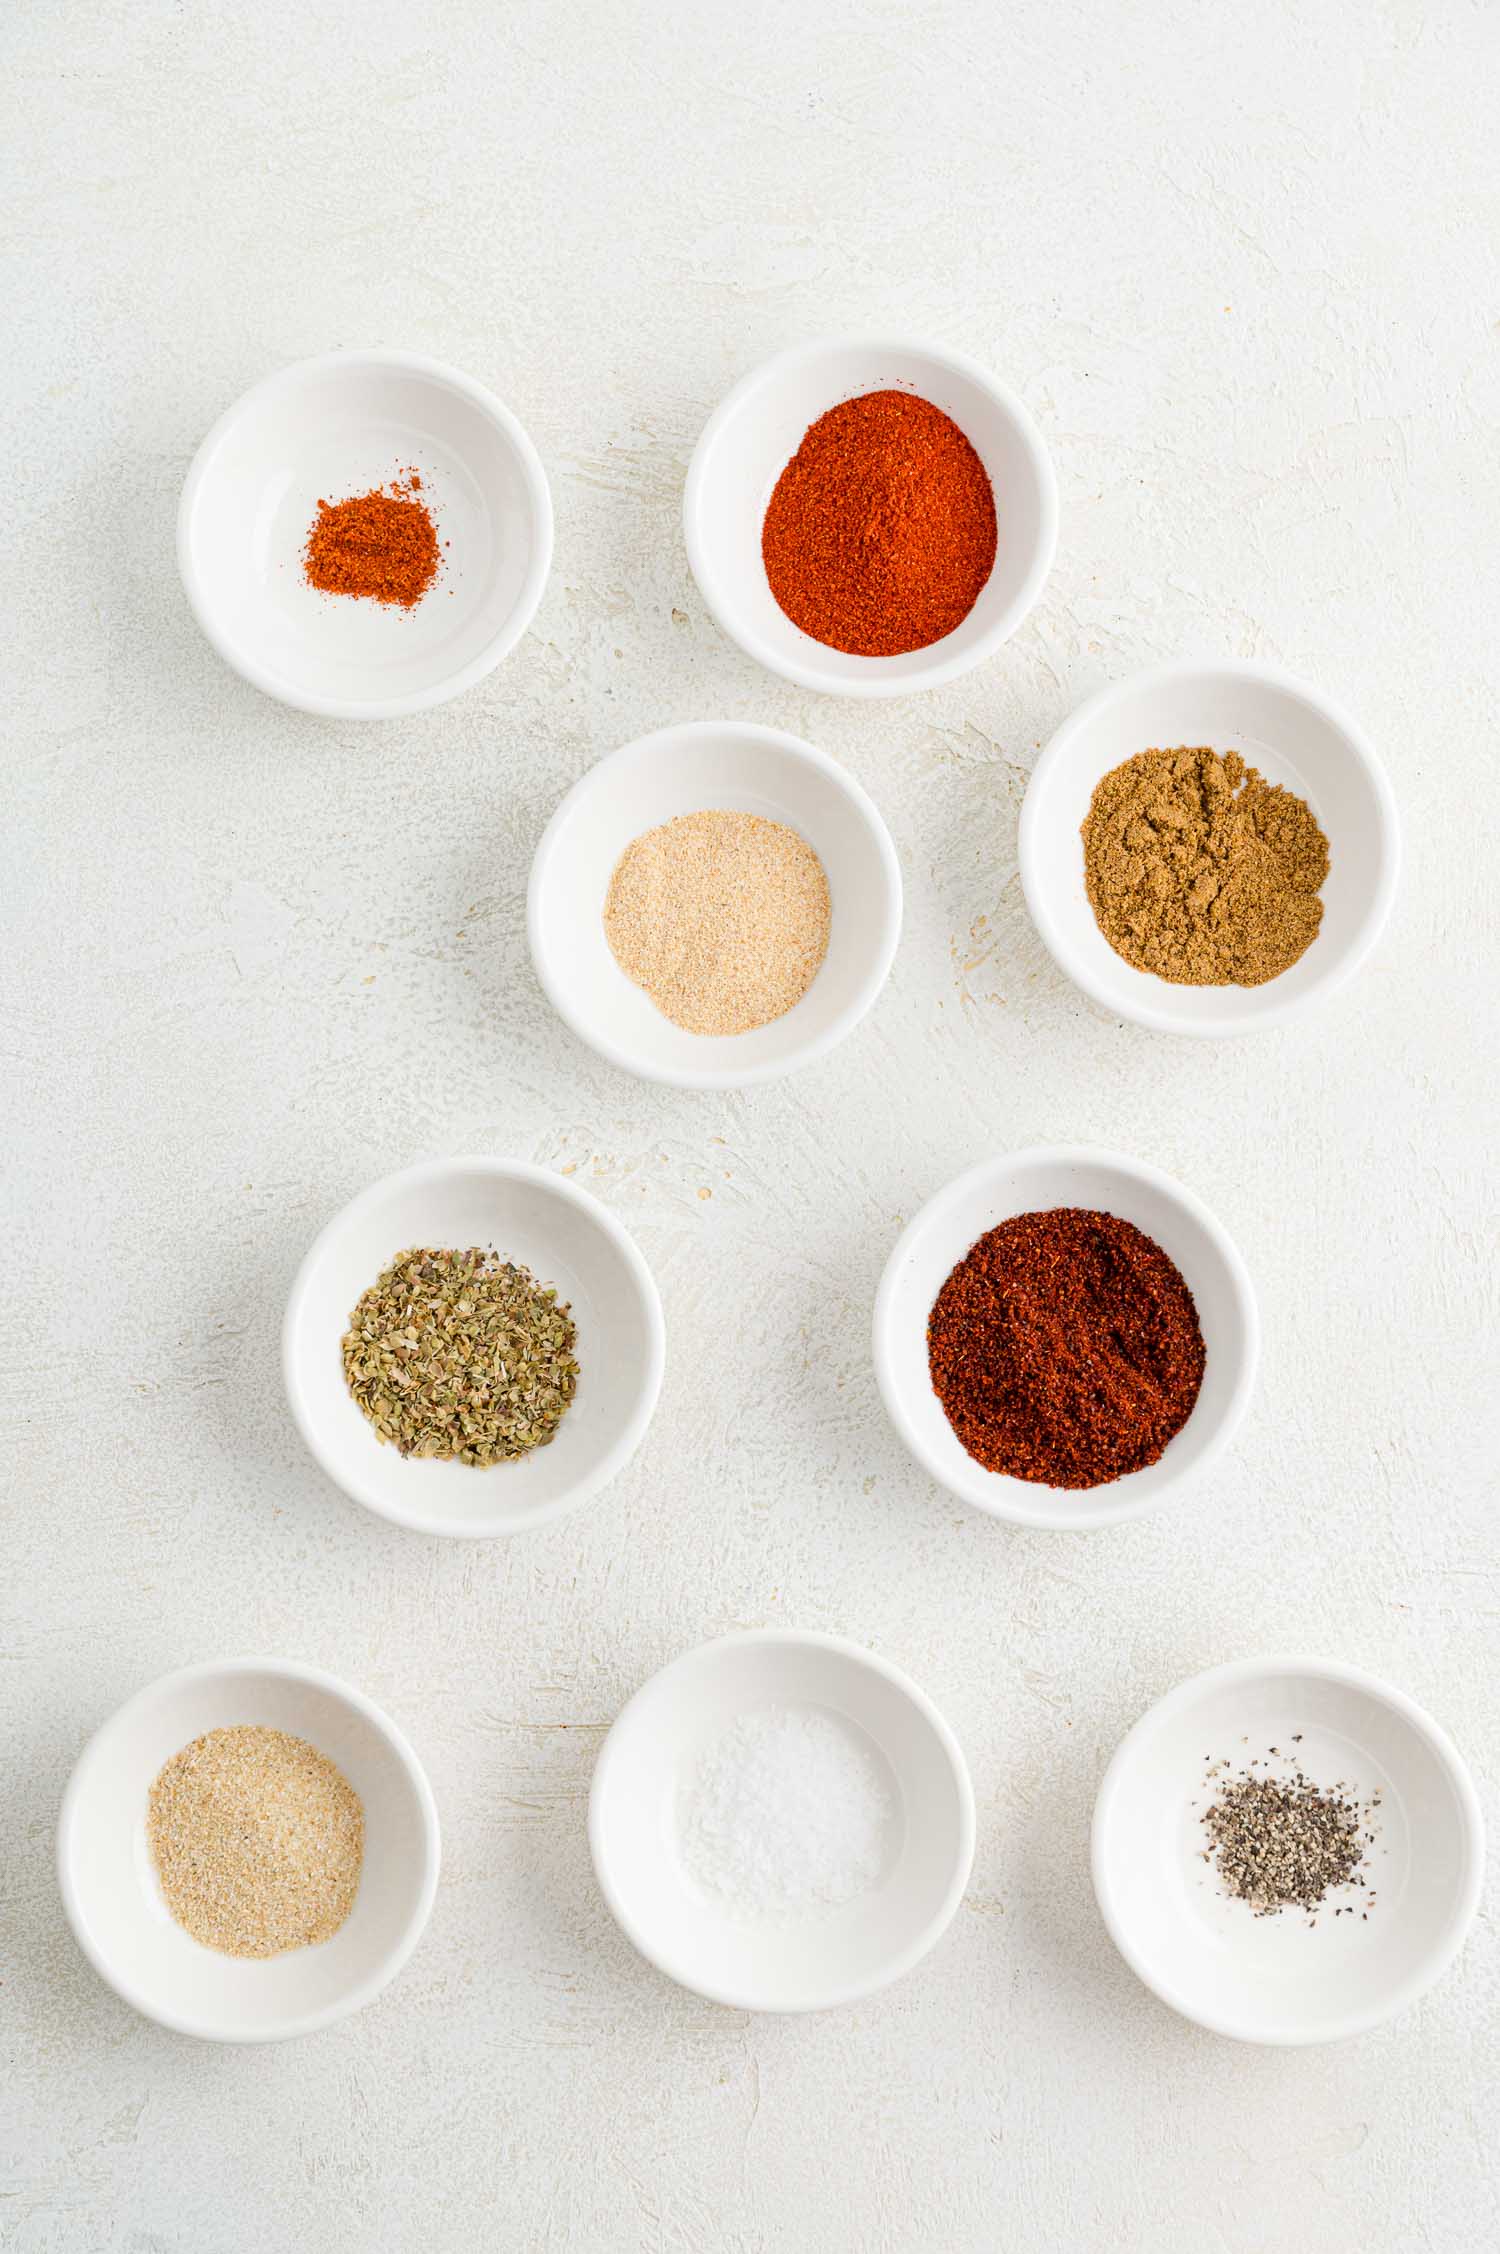 The ingredients for a Southwest spice blend.